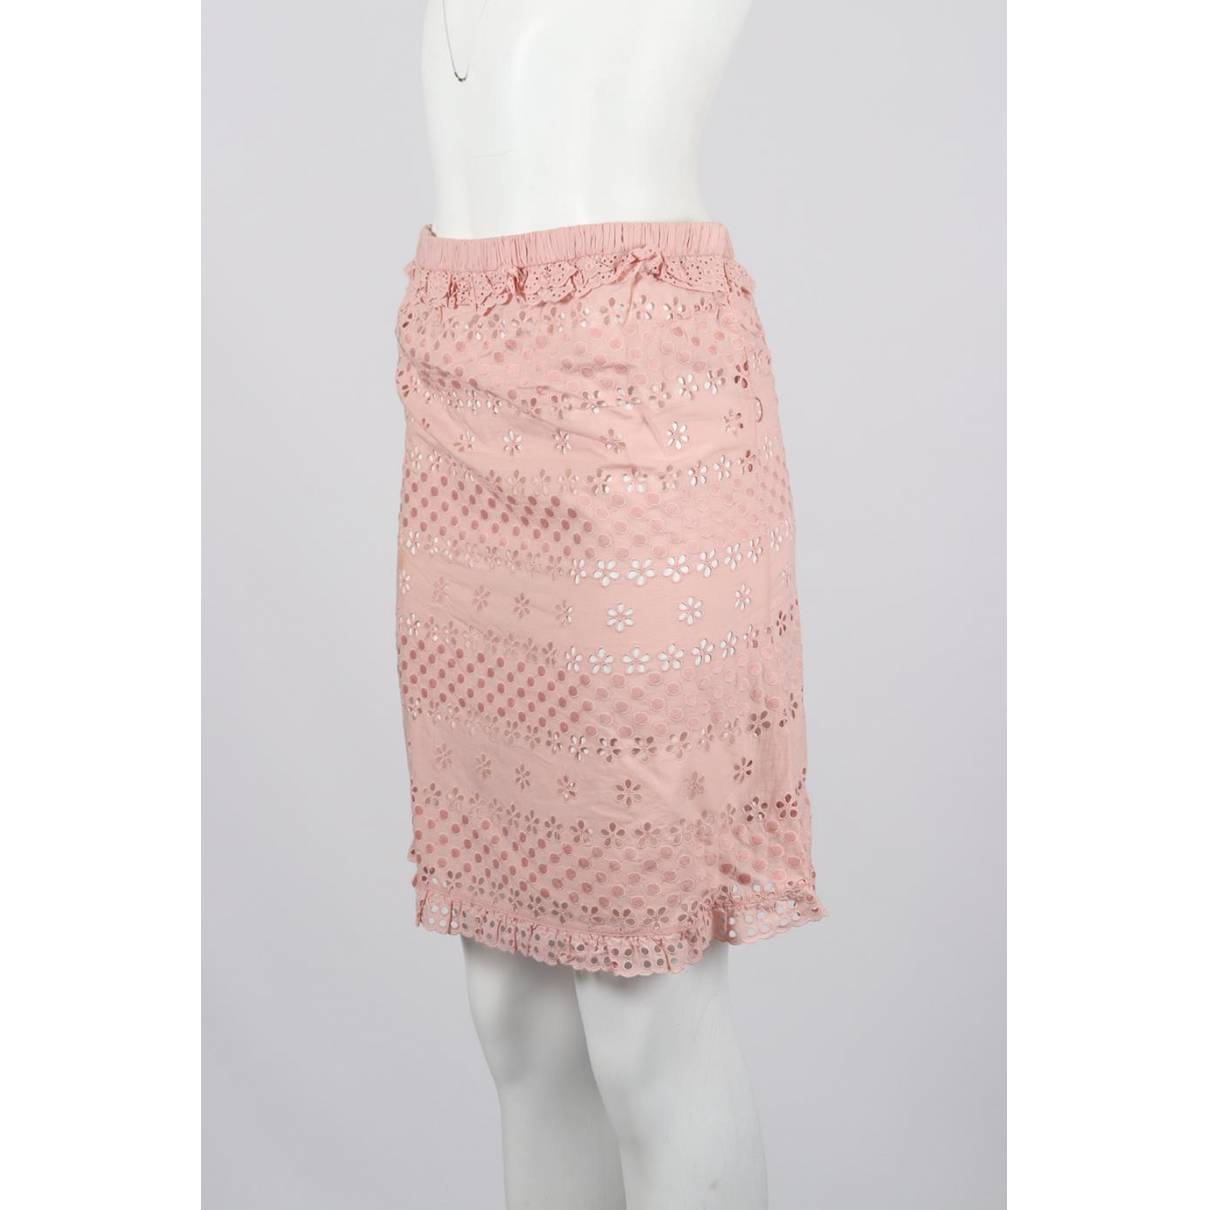 Louis Vuitton - Authenticated Skirt - Cotton Pink Plain for Women, Very Good Condition